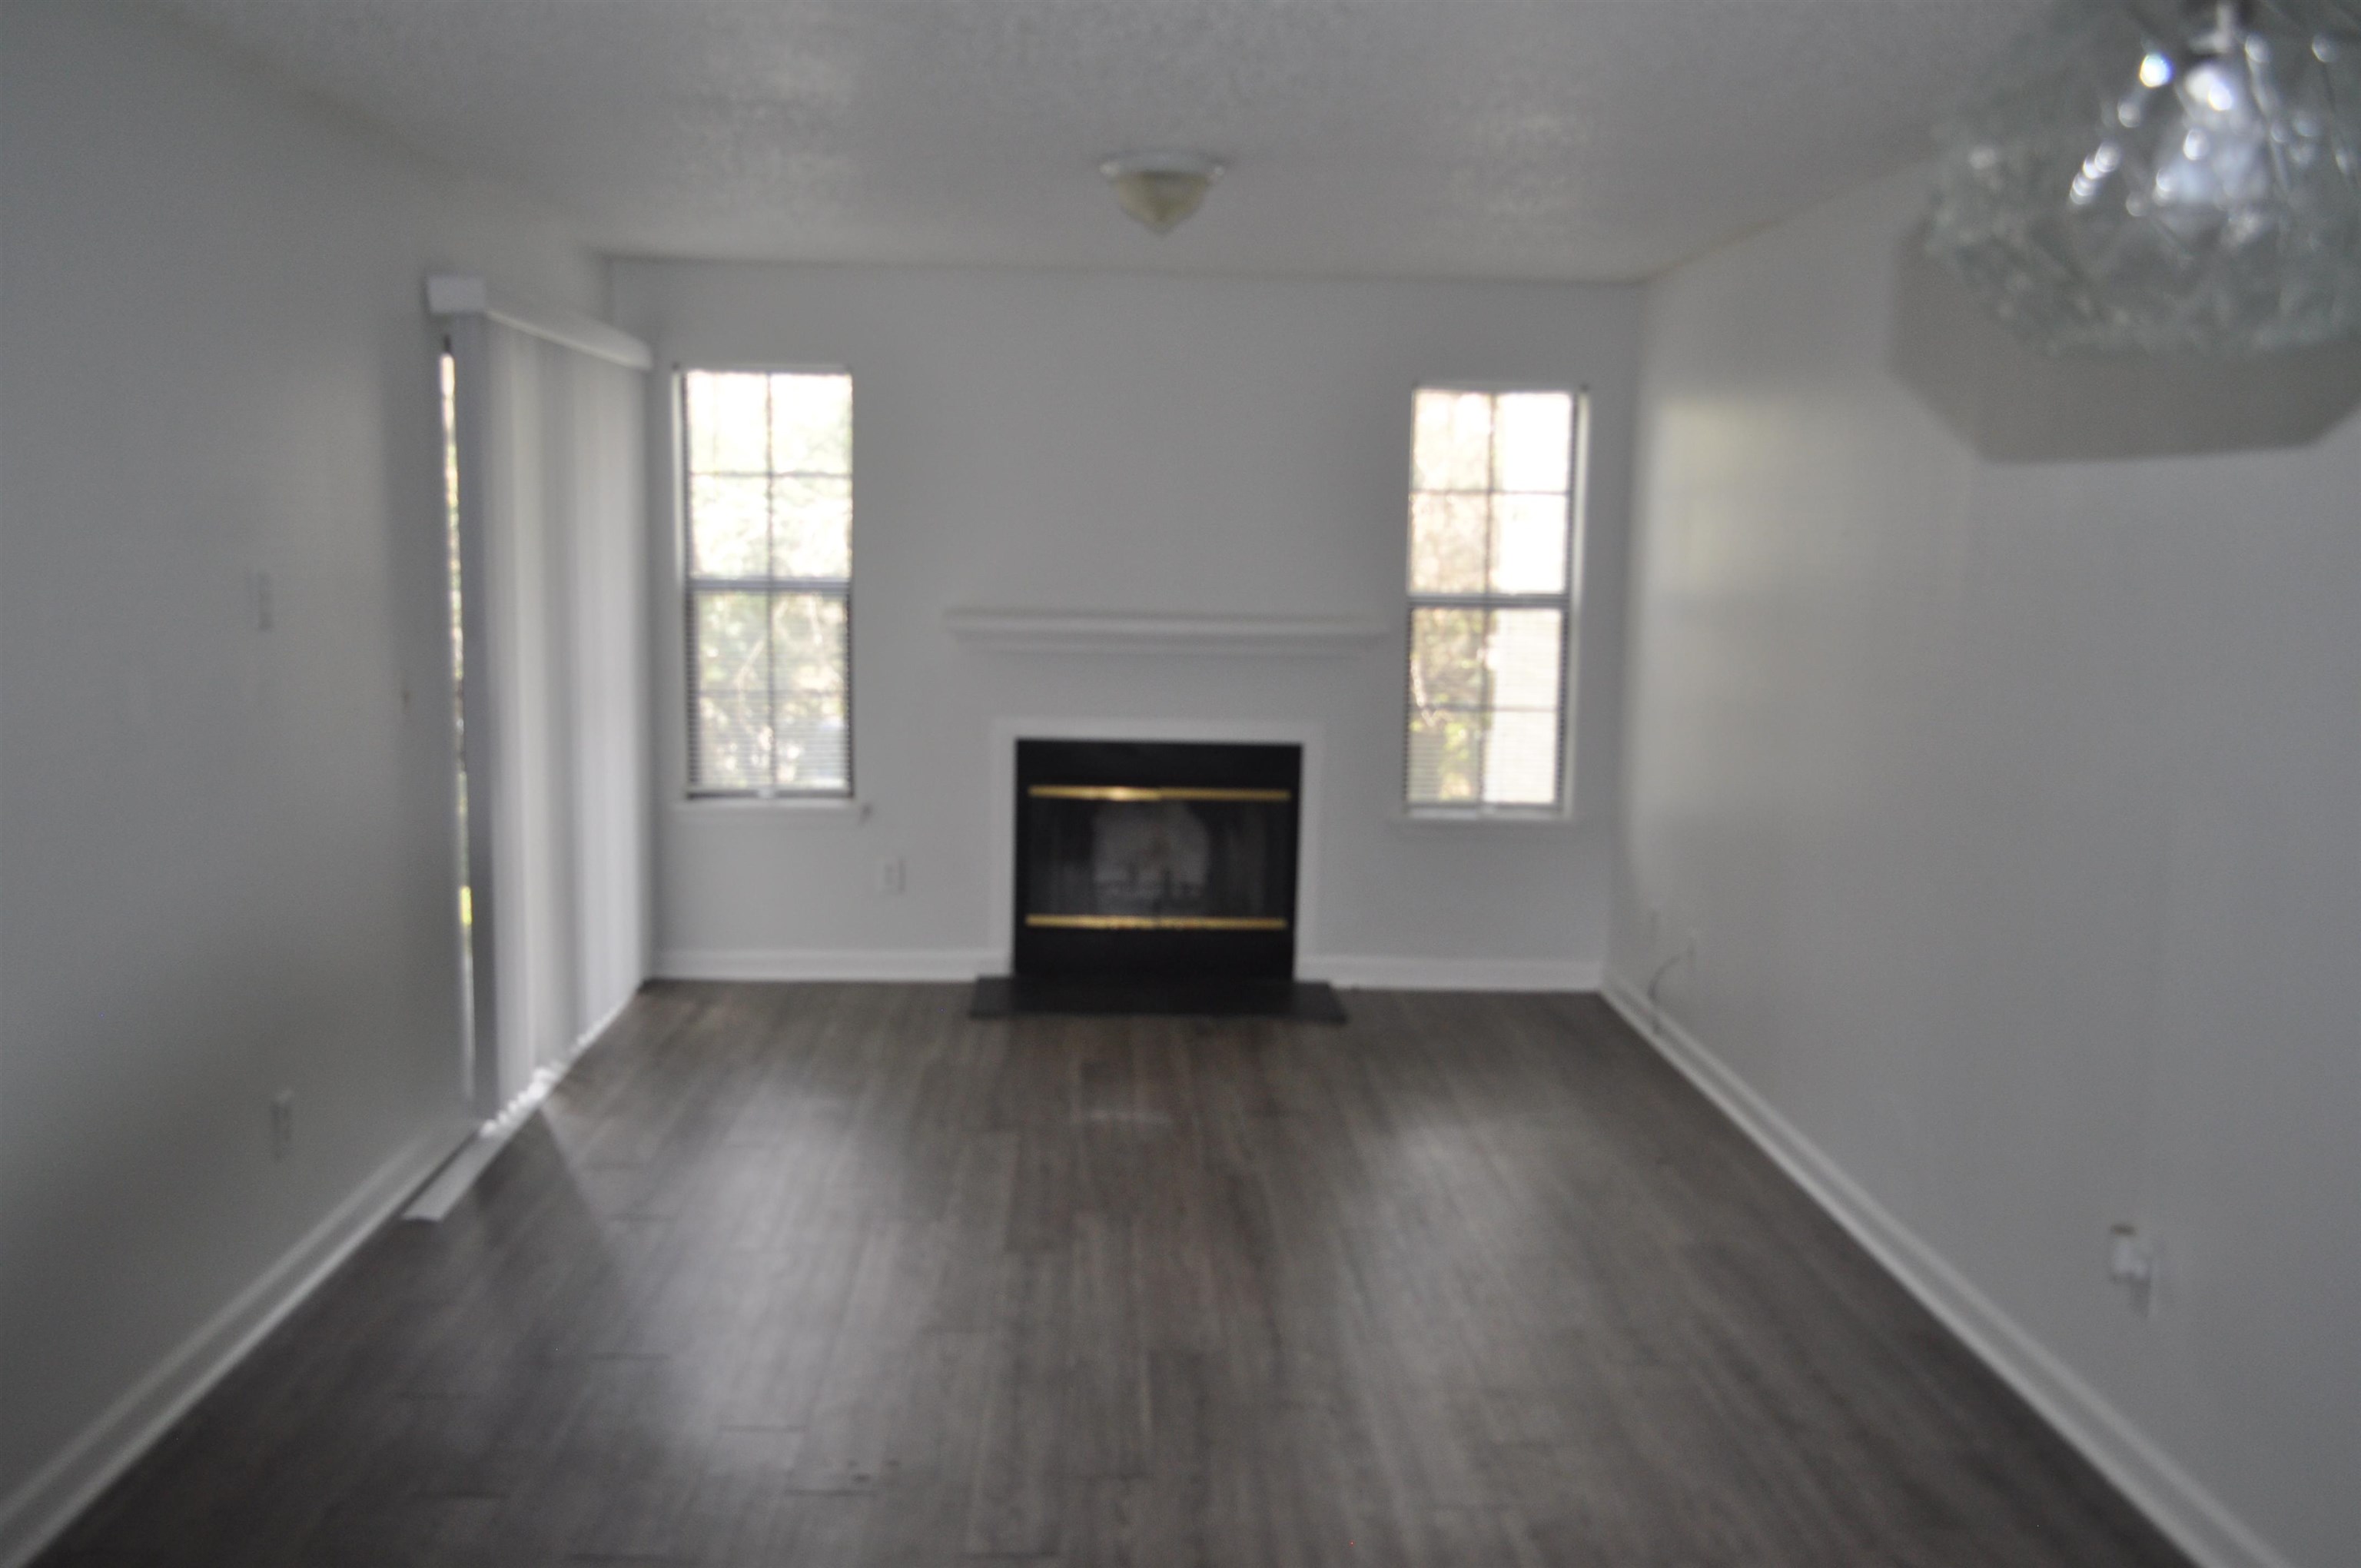 1103 GREENTREE #A Court,TALLAHASSEE,Florida 32304,1 Bedroom Bedrooms,Condo,1103 GREENTREE #A Court,370307